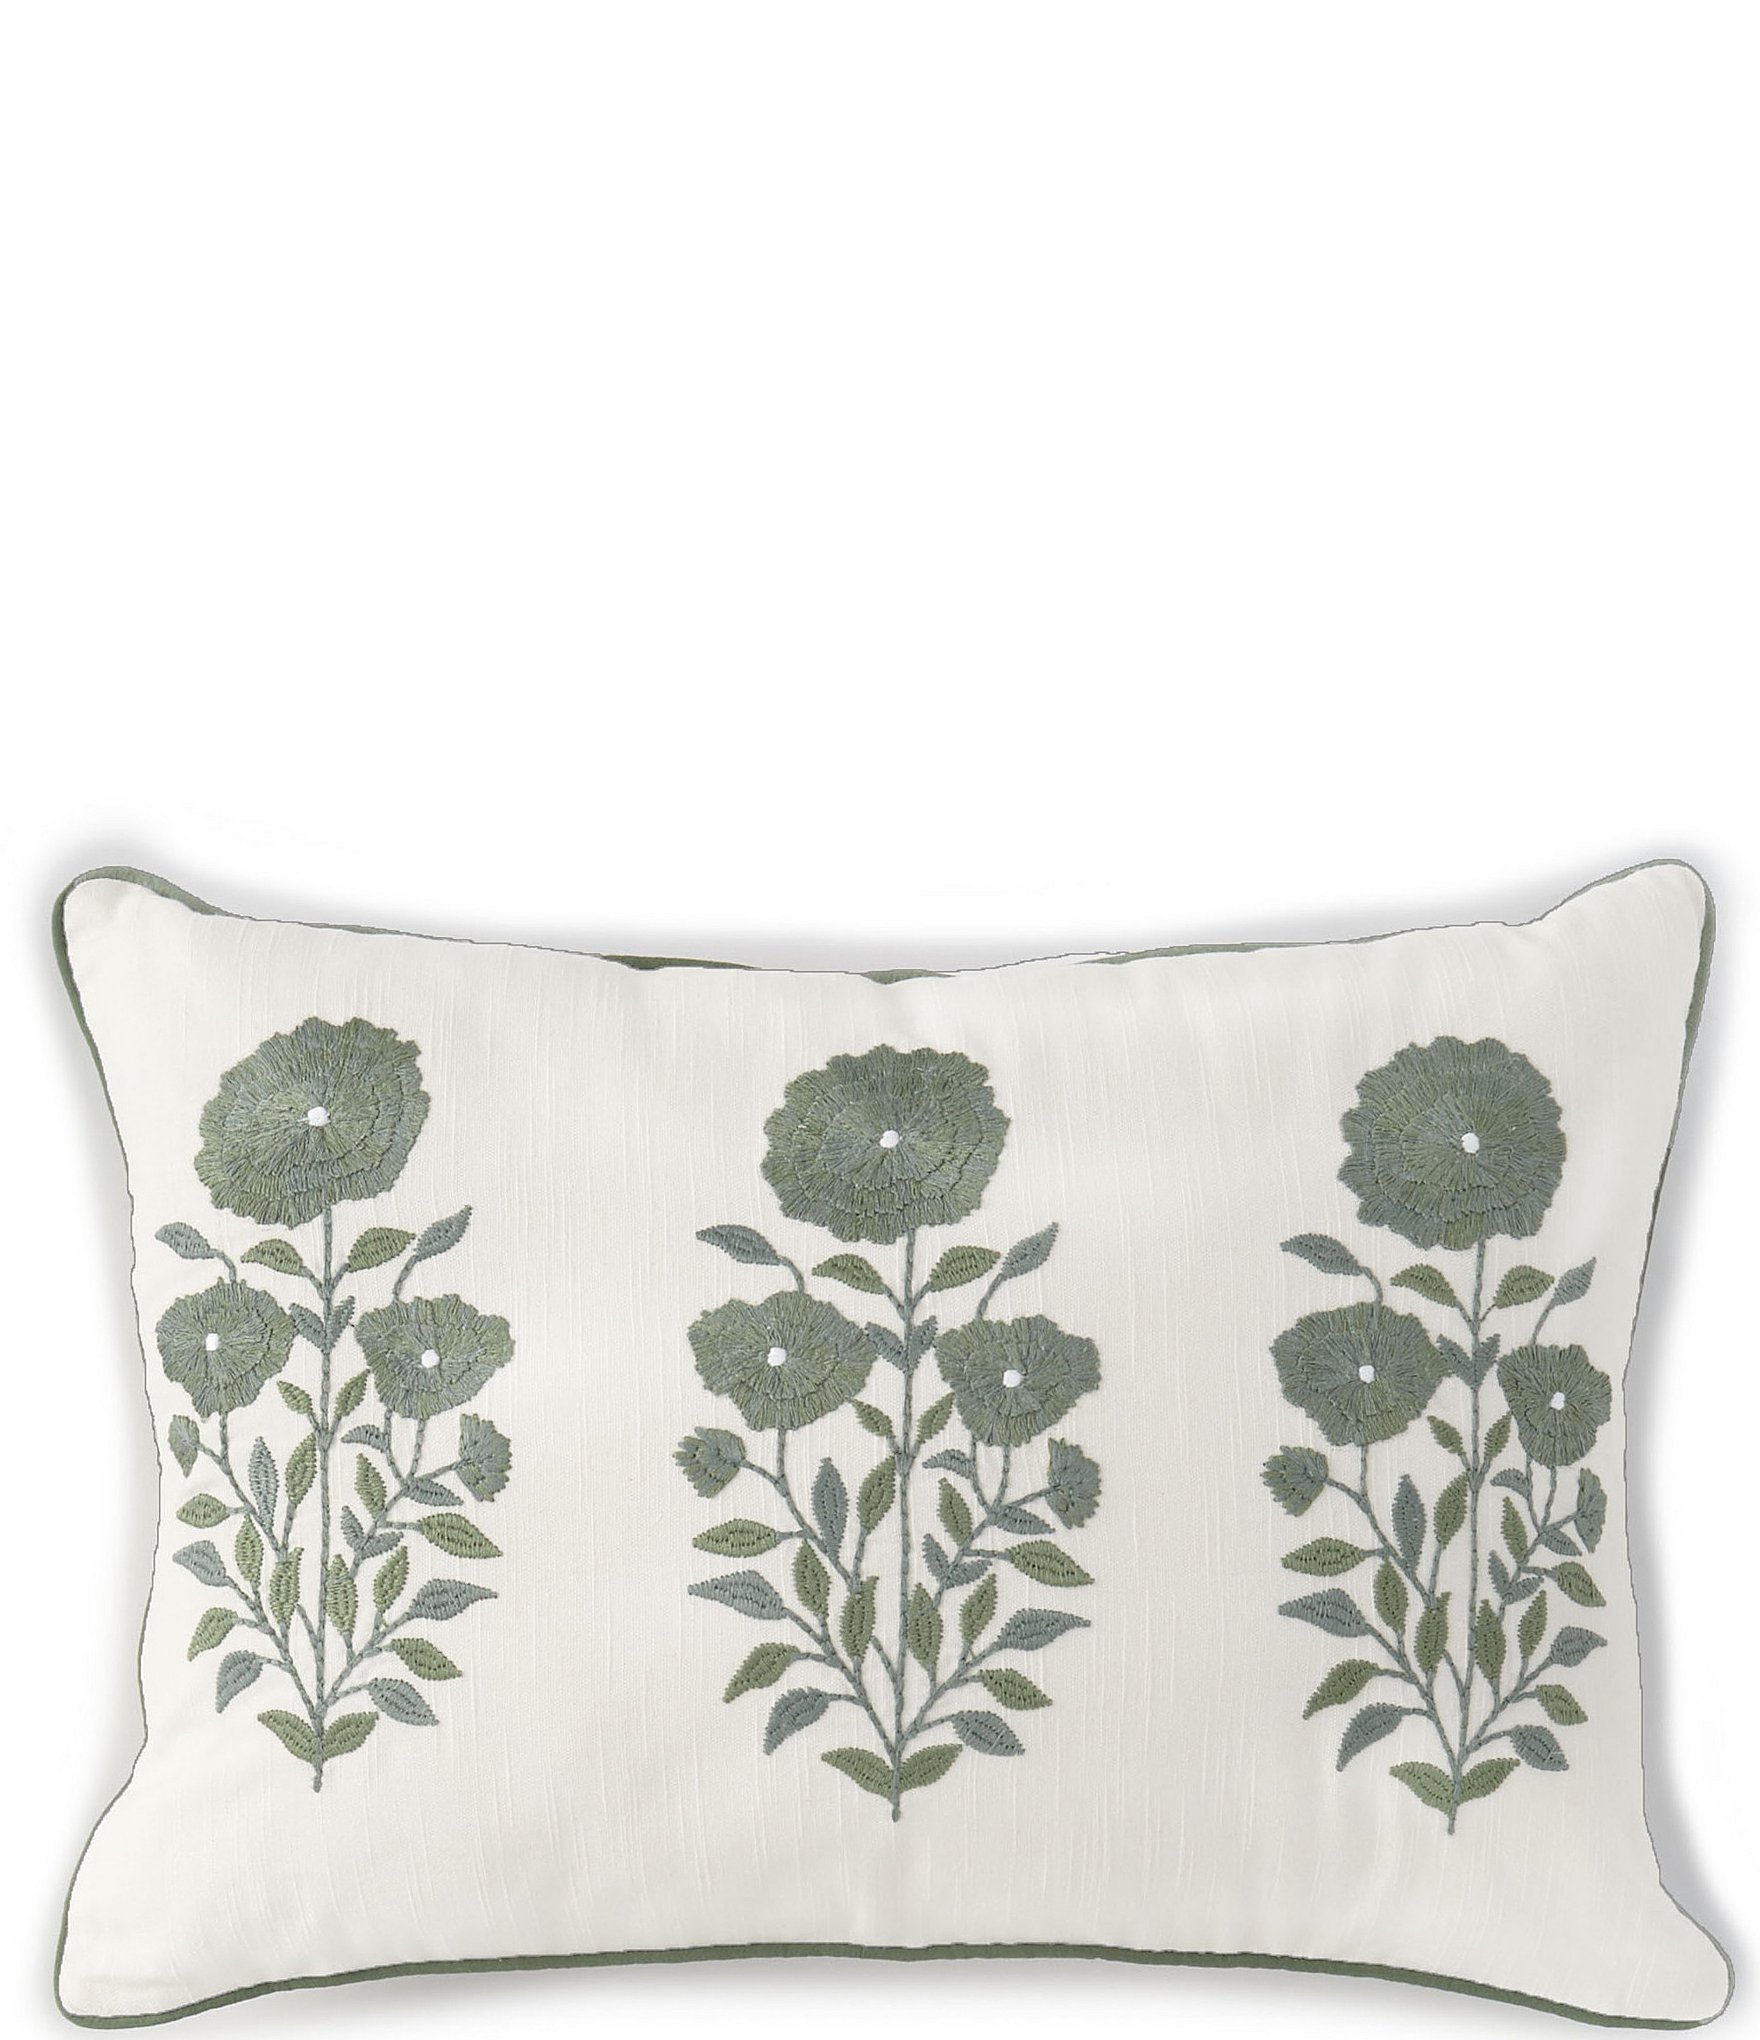 https://dimg.dillards.com/is/image/DillardsZoom/zoom/southern-living-catherine-embroidered-floral-decorative-pillow/00000000_zi_8e4f734f-ab21-46a6-841c-30456d31bf72.jpg